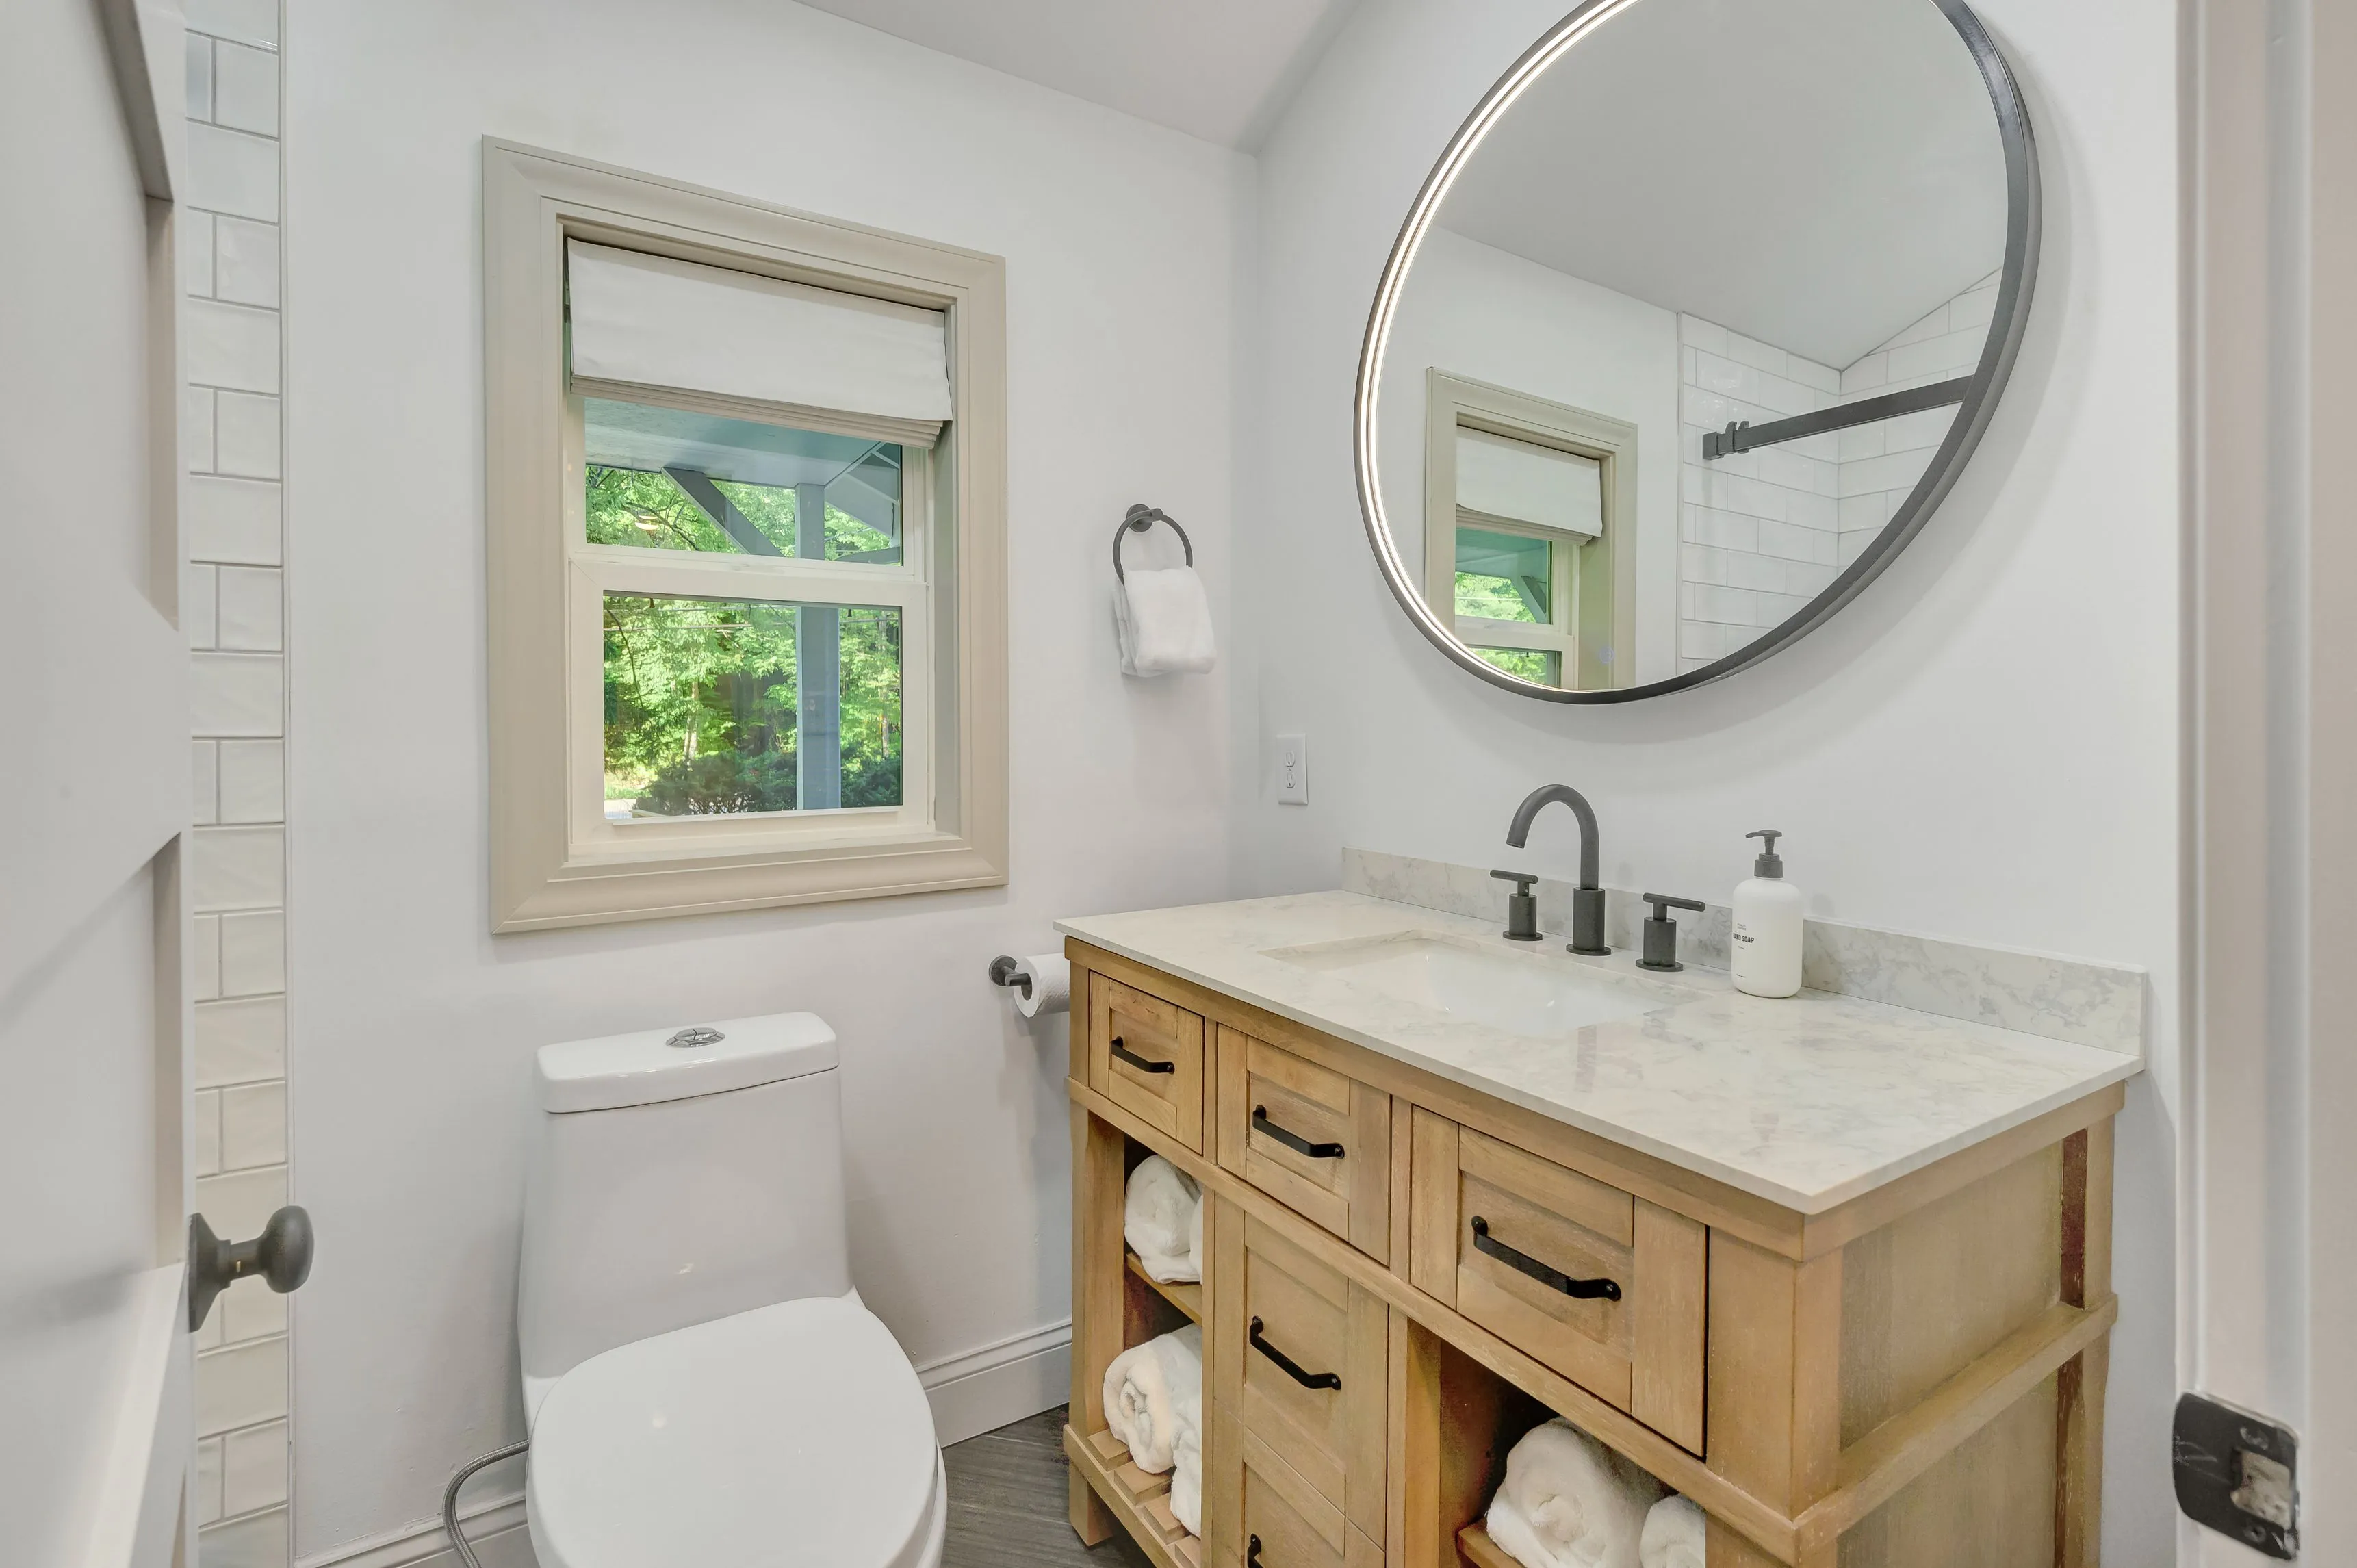 Modern bathroom interior with wooden vanity cabinet, marble countertop, round mirror, and view of greenery outside the window.